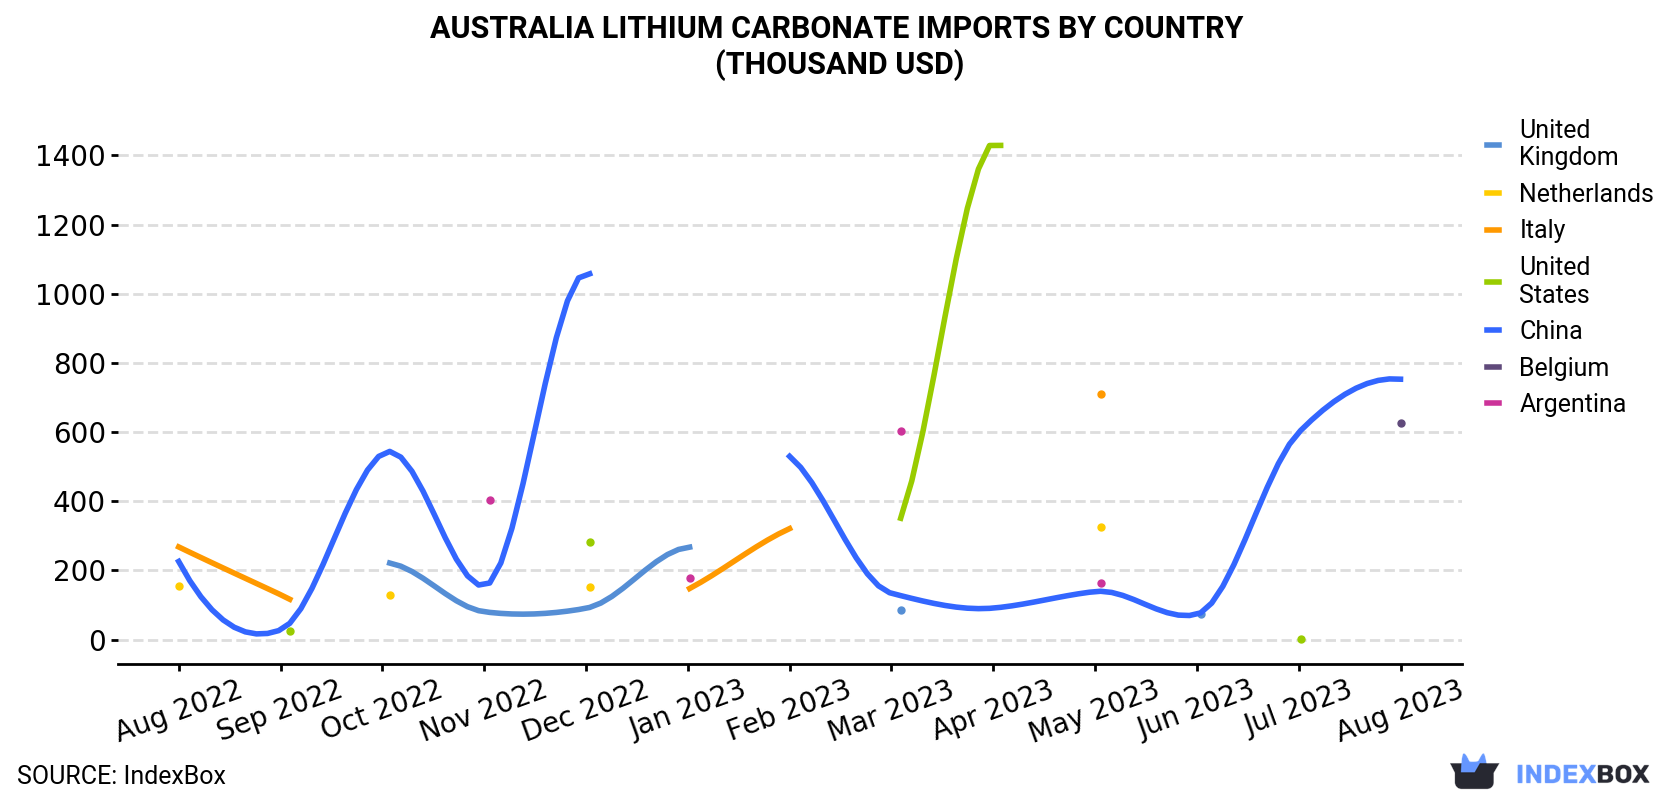 Australia Lithium Carbonate Imports By Country (Thousand USD)